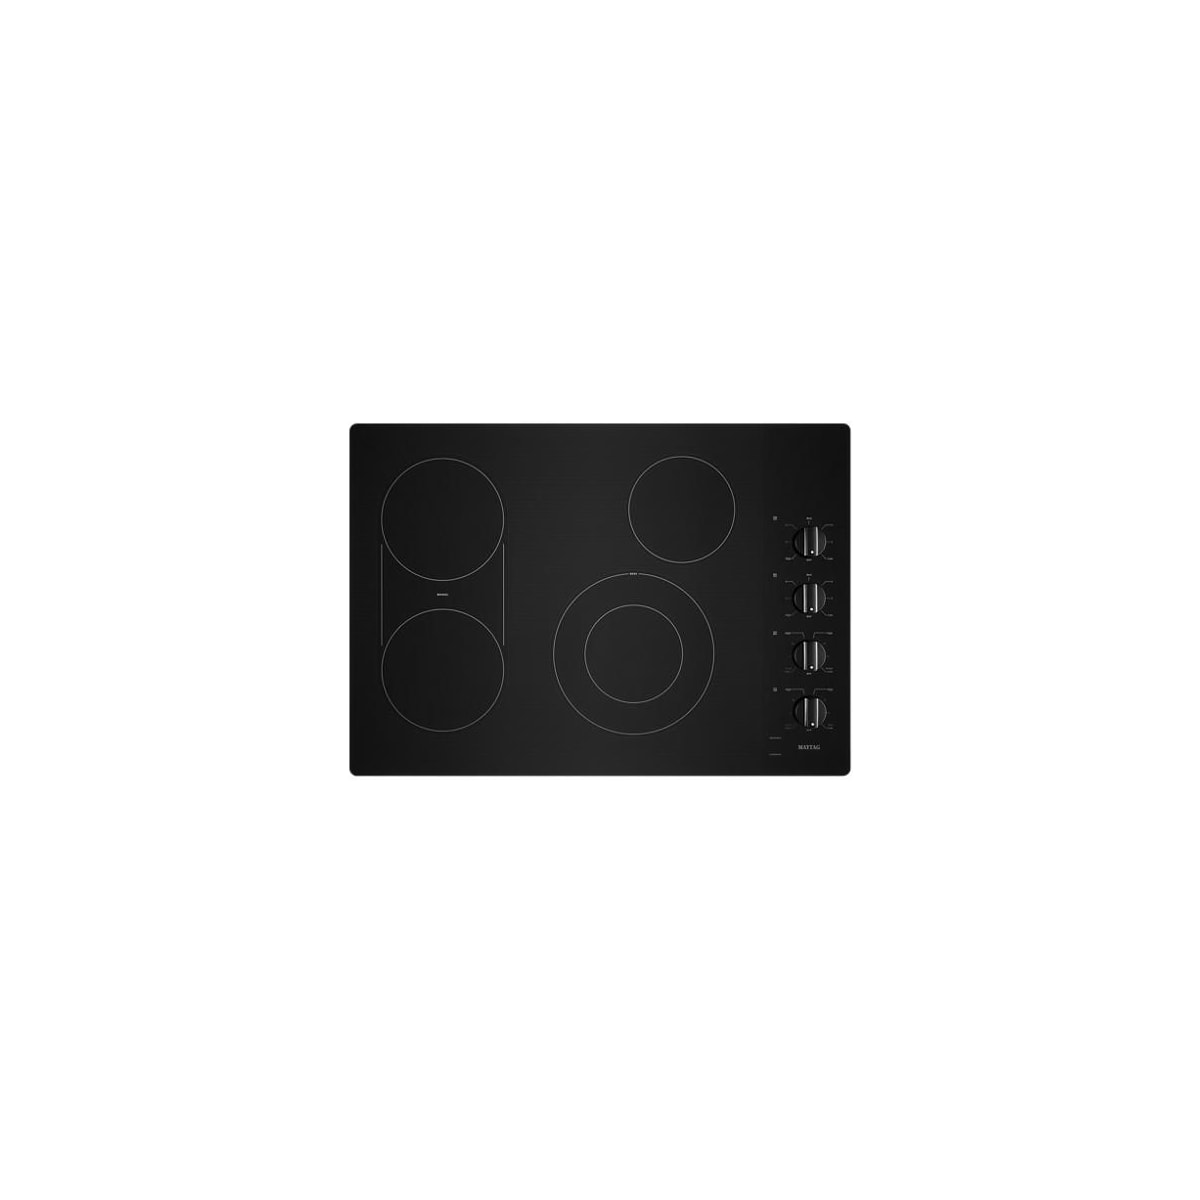 MEC8830HB Maytag 30-Inch Electric Cooktop with Reversible Grill